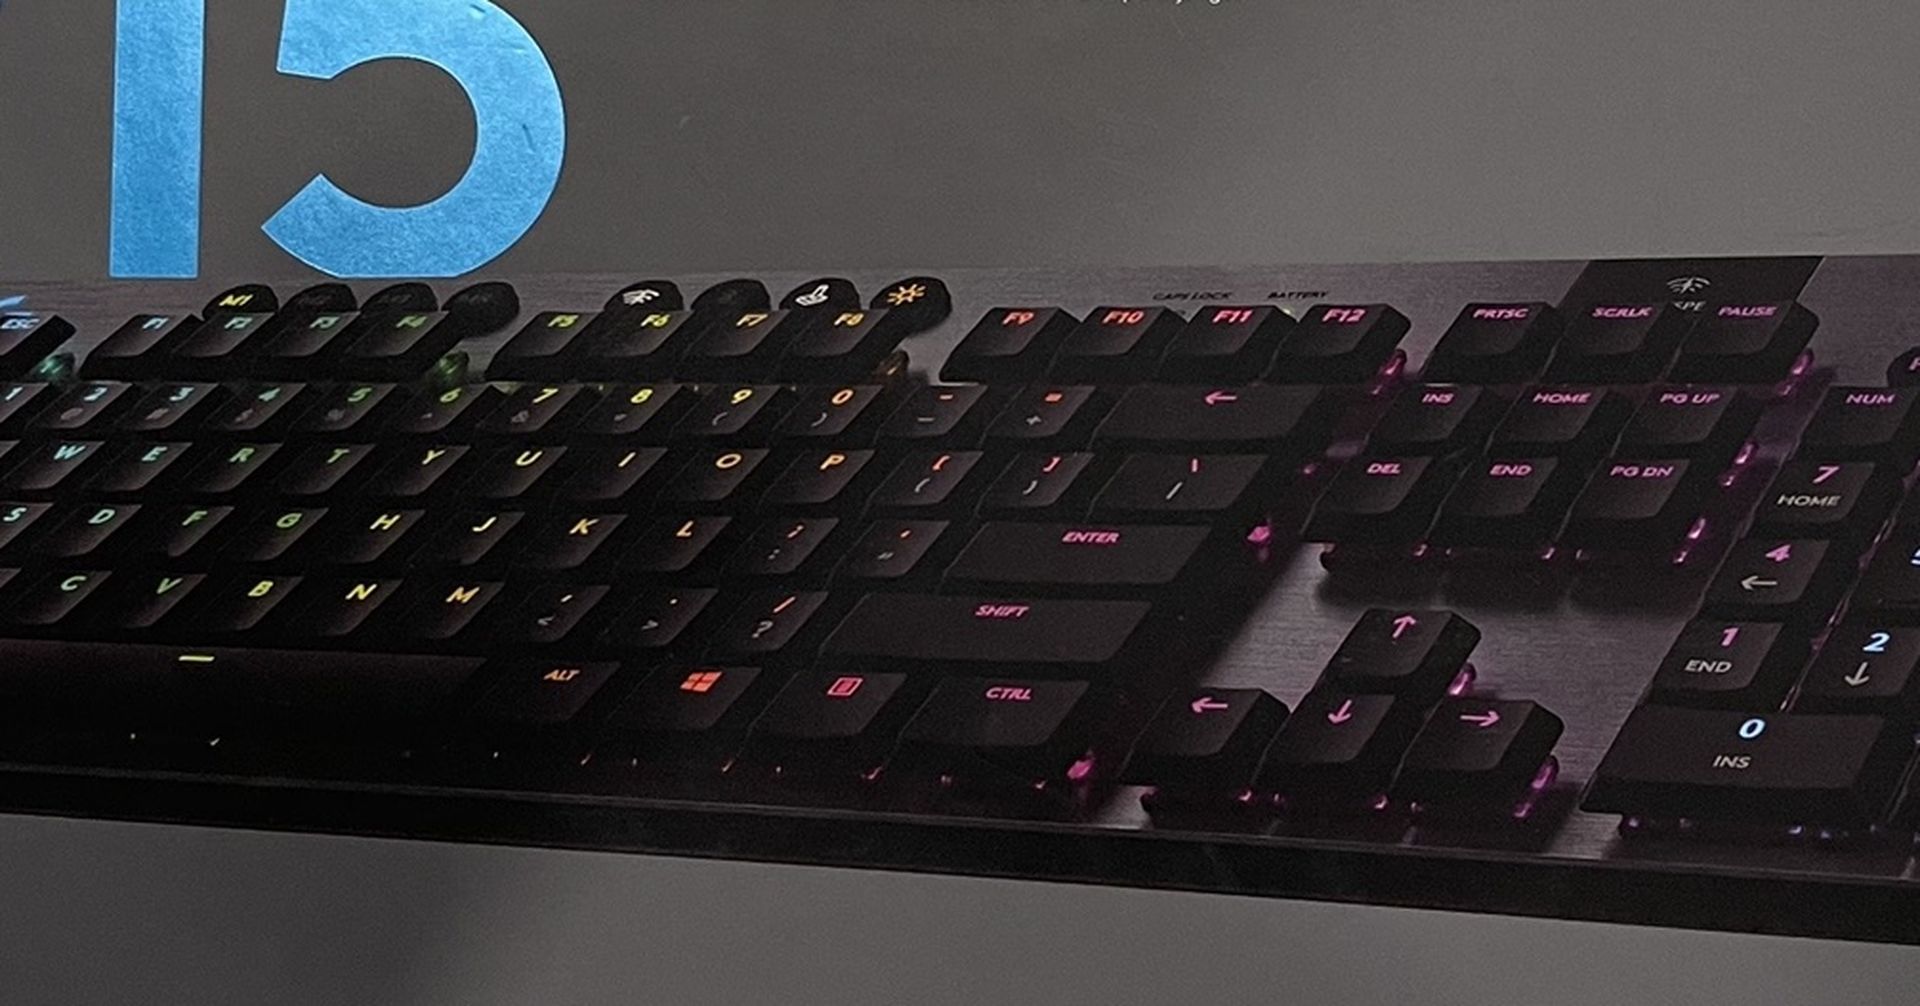 Gaming Keyboard Logitech Clicky G915 WIRELESS - Perfect condition! - SouthEast Austin 78744